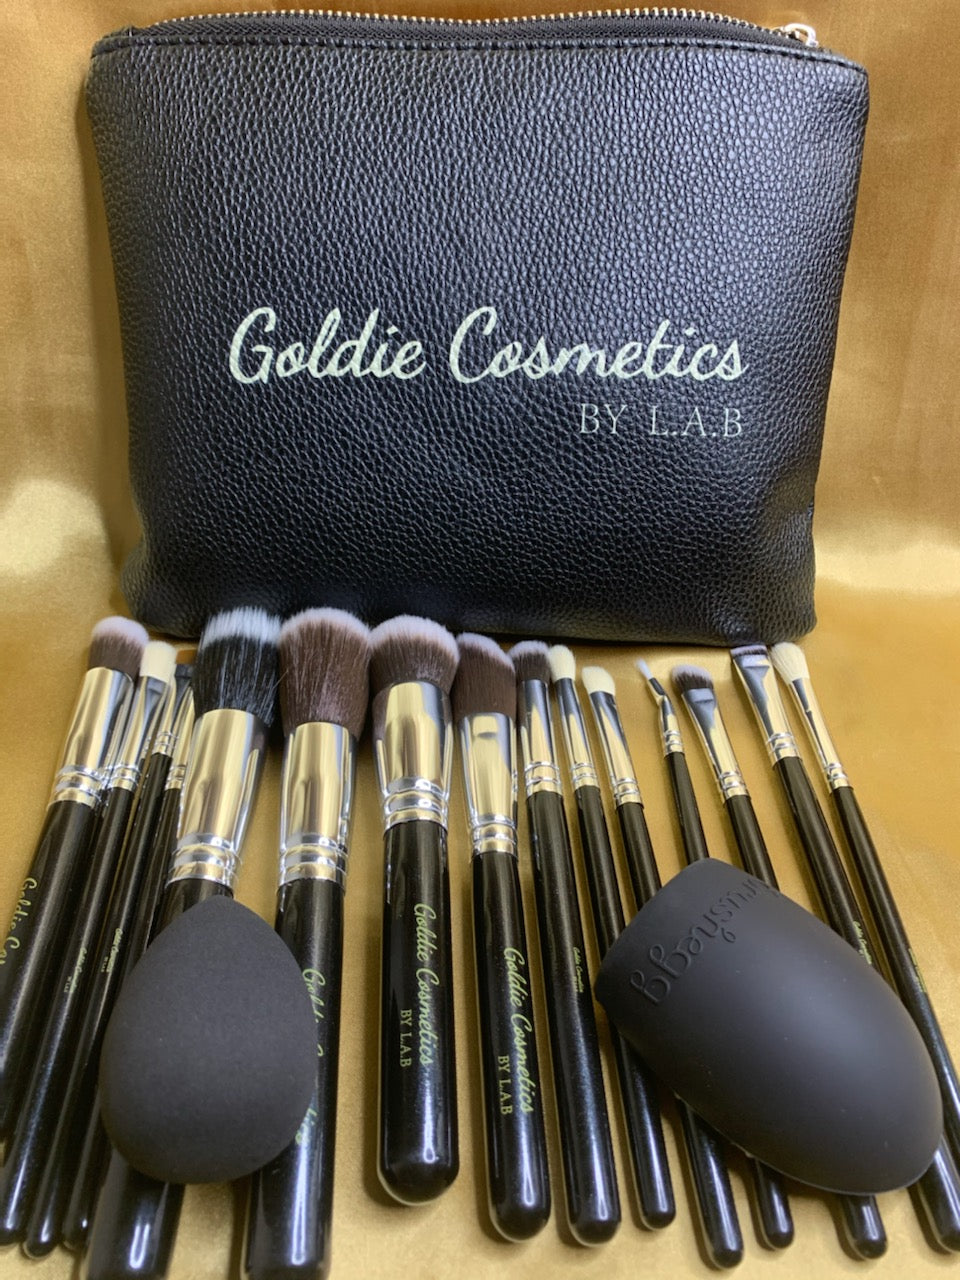 15 piece brushes with cosmetics bag, brush cleaner, and sponge